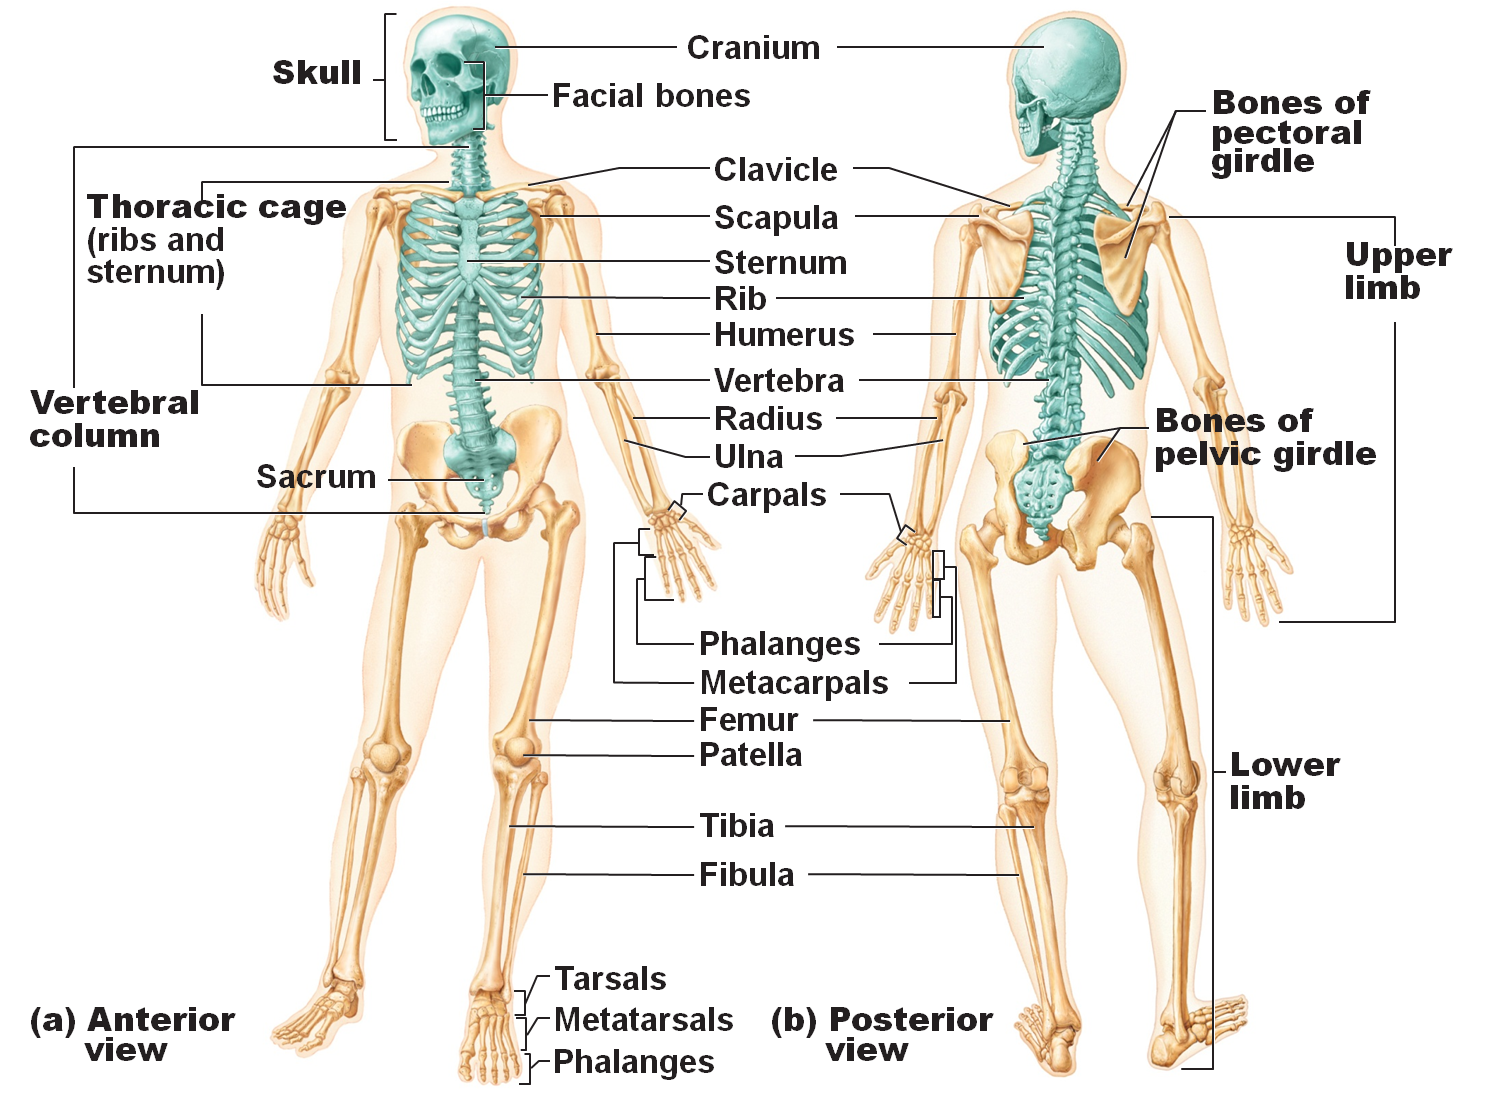 What Are The Functions Of The Skeletal System?